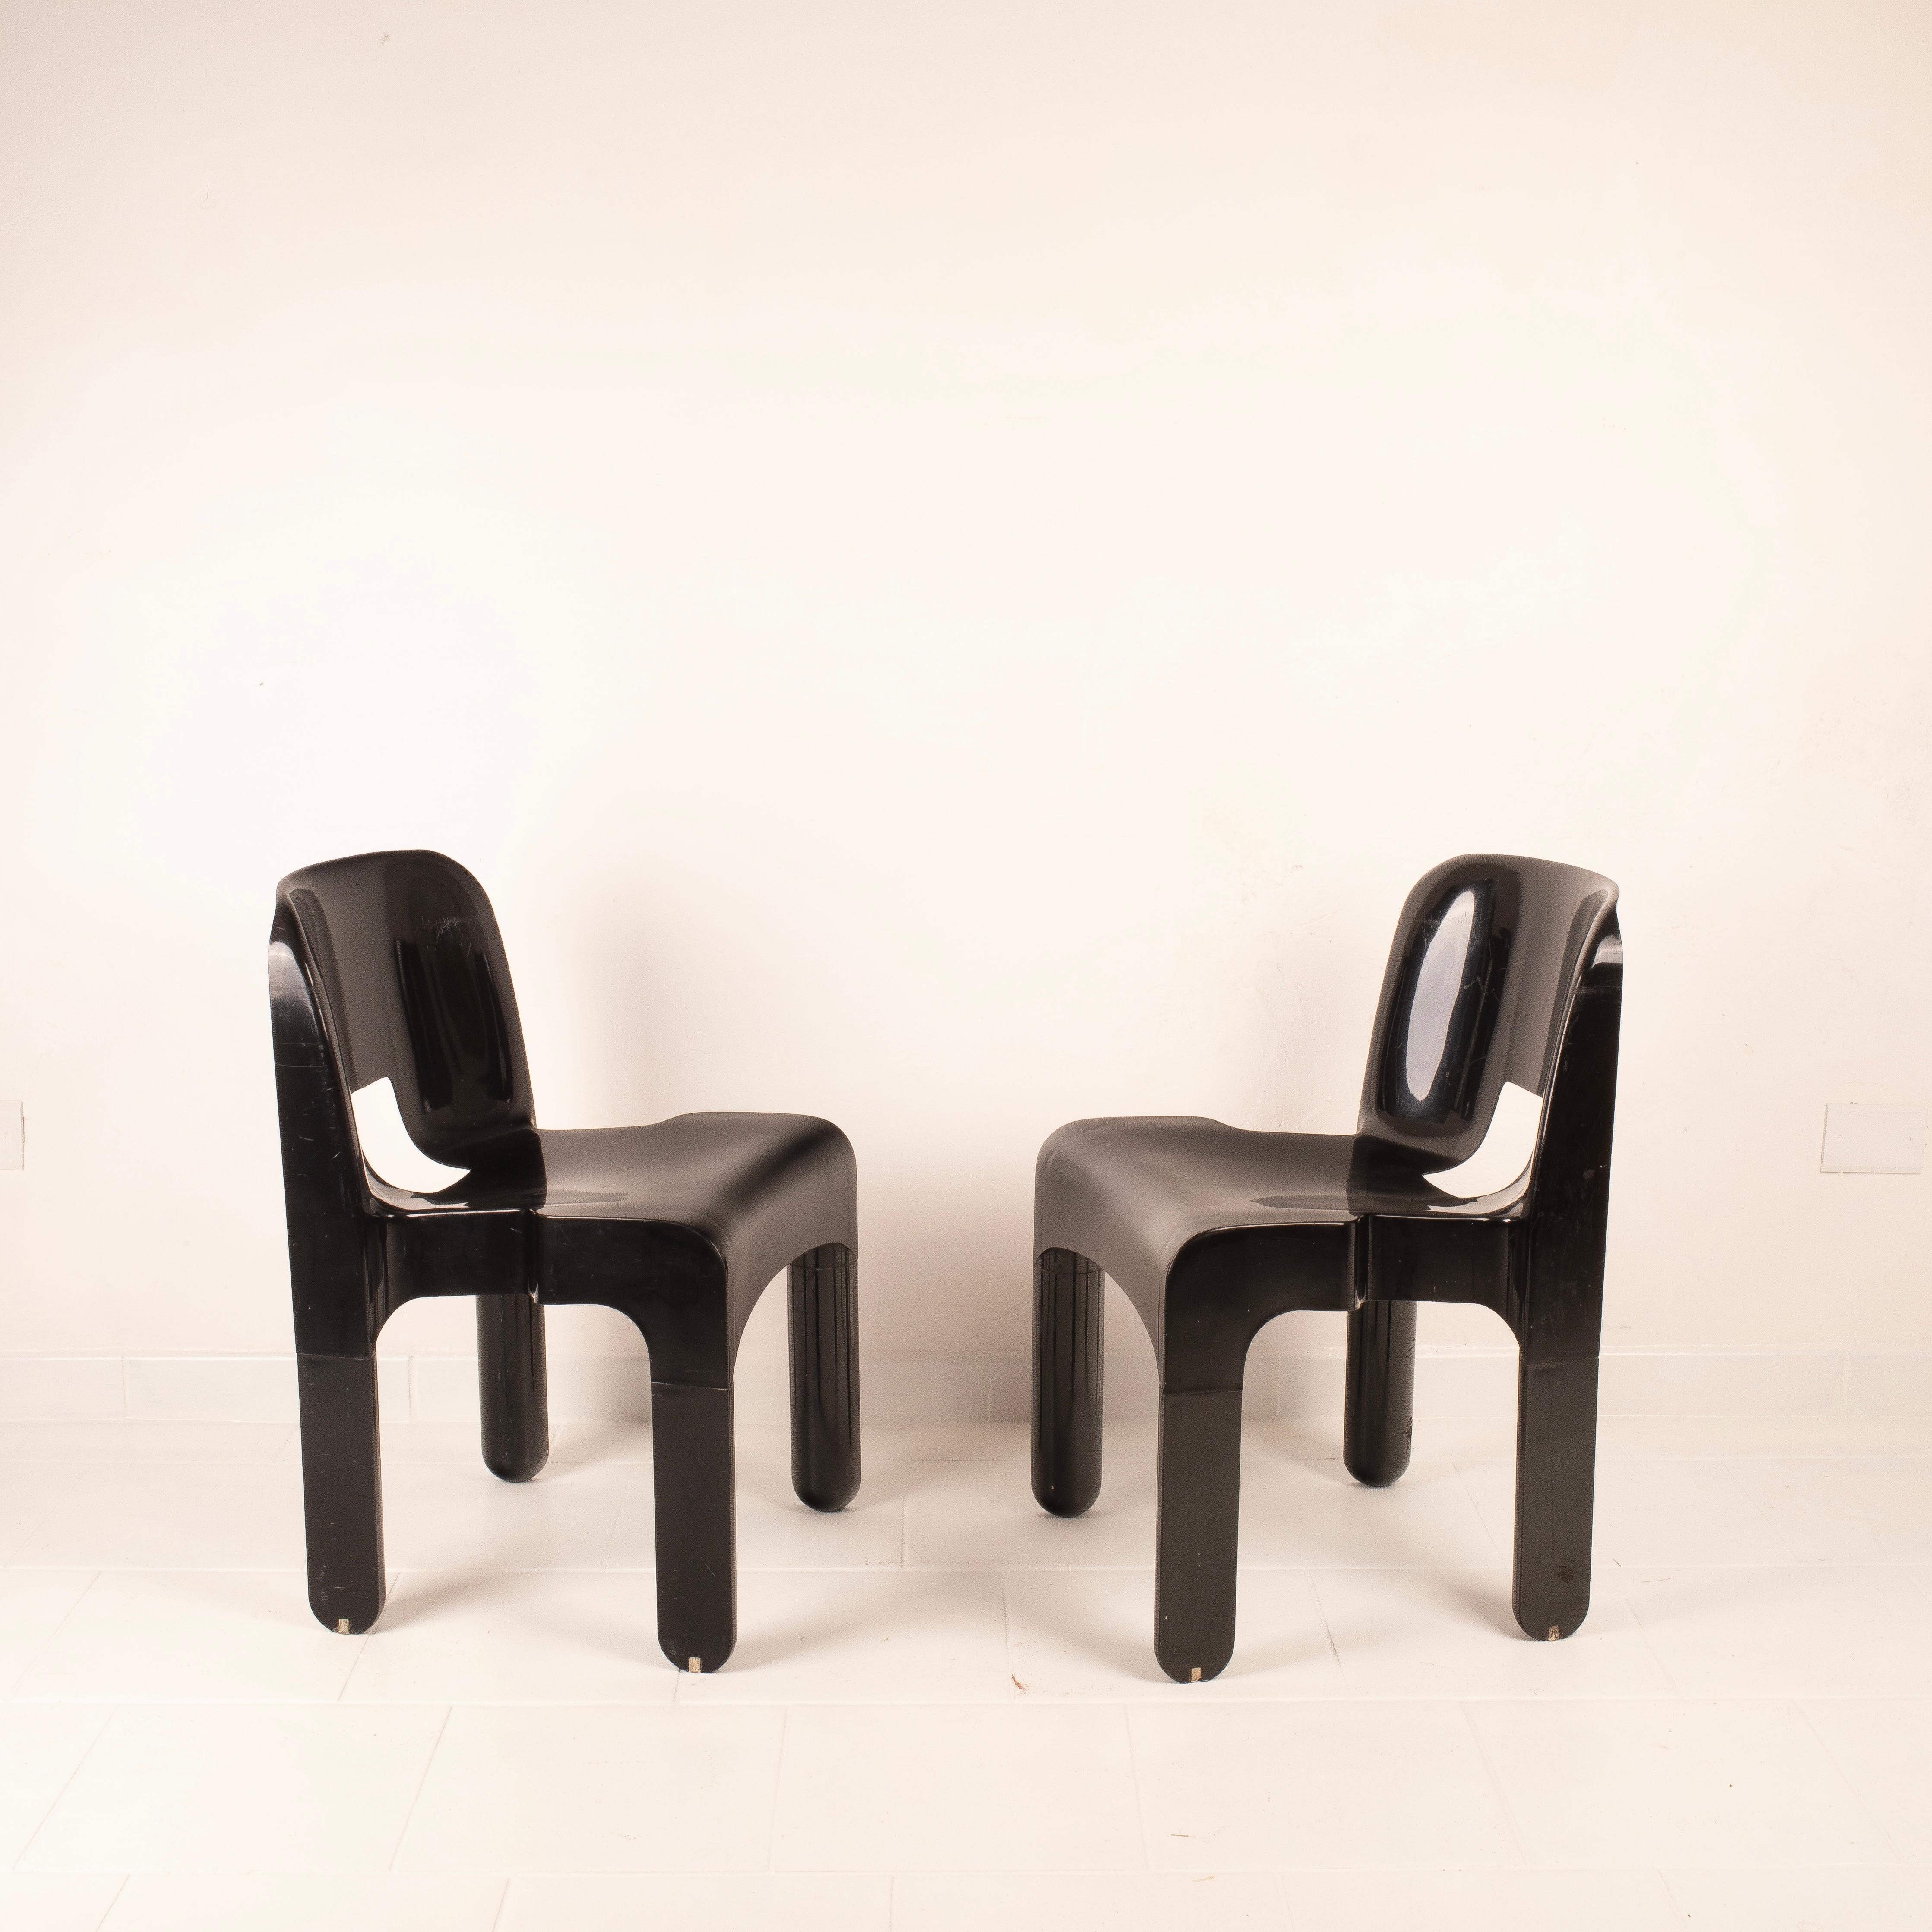 Joe Colombo's black Universale chair produced by Kartell is an iconic creation of 1960s Italian design.
This chair features a minimalist and elegant design that has made it a cult object in the world of furniture design.
The chair features a